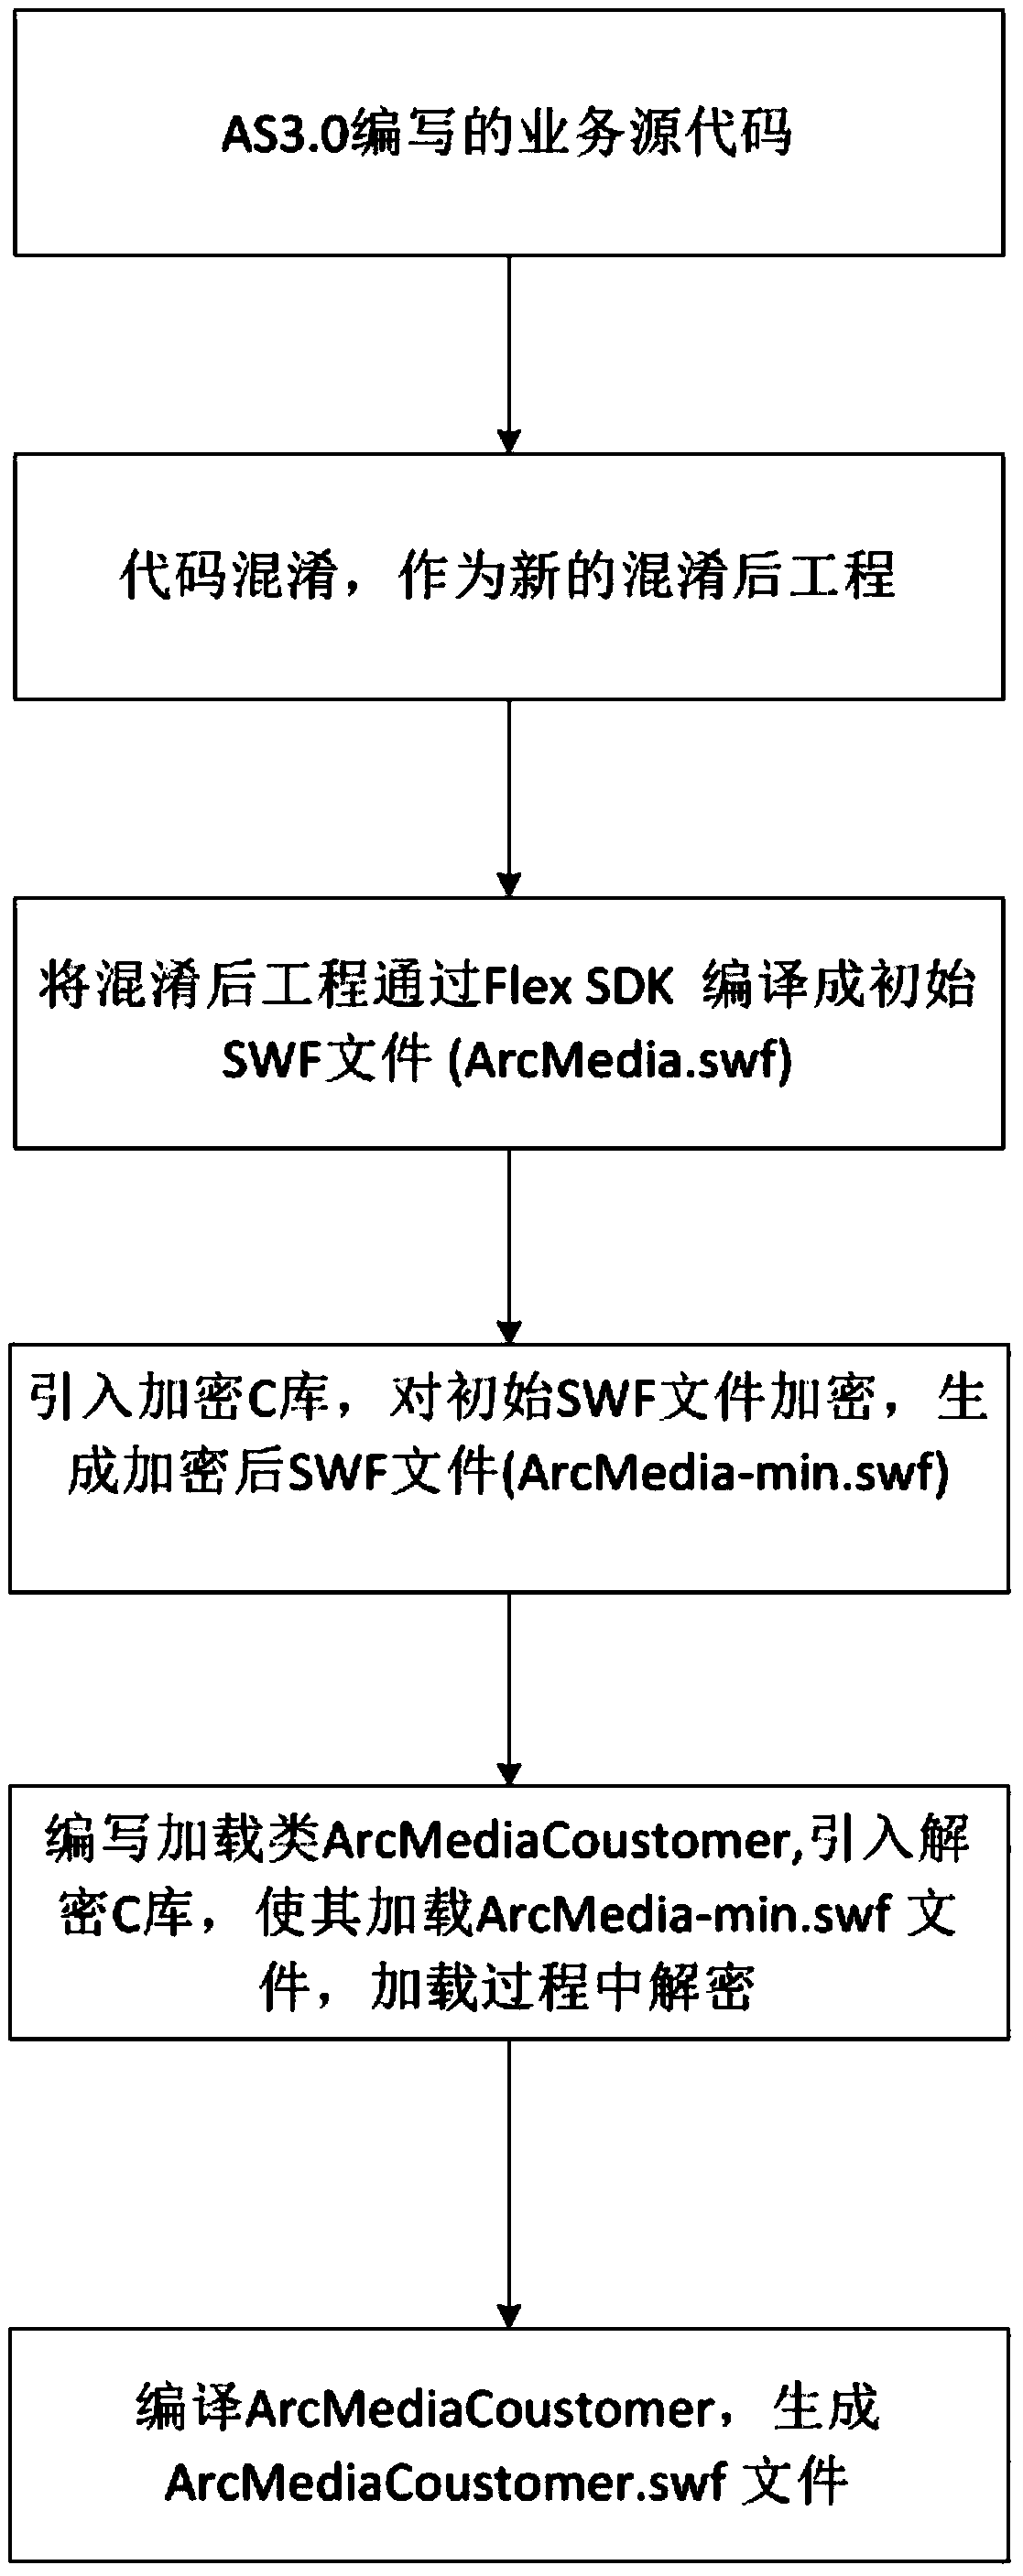 A method for SWF obfuscation encryption